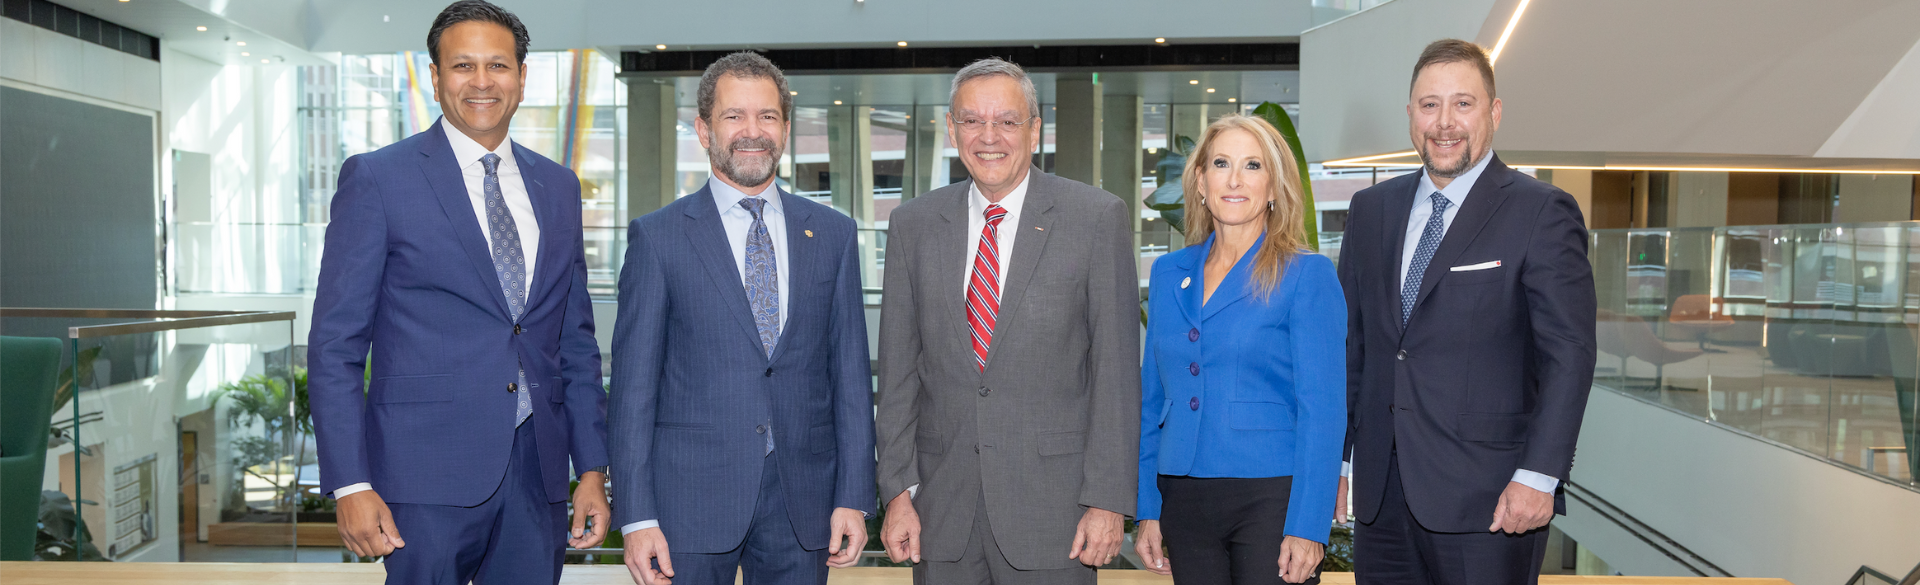 Leaders posing for photo; from left to right: Vik Bebarta, MD; Todd Saliman, CU President; Lester Martinez-Lopez, MD, MPH; Brig Gen Kathleen Flarity, DNP, PhD; Christian P. Anschutz, President of the Anschutz Foundation